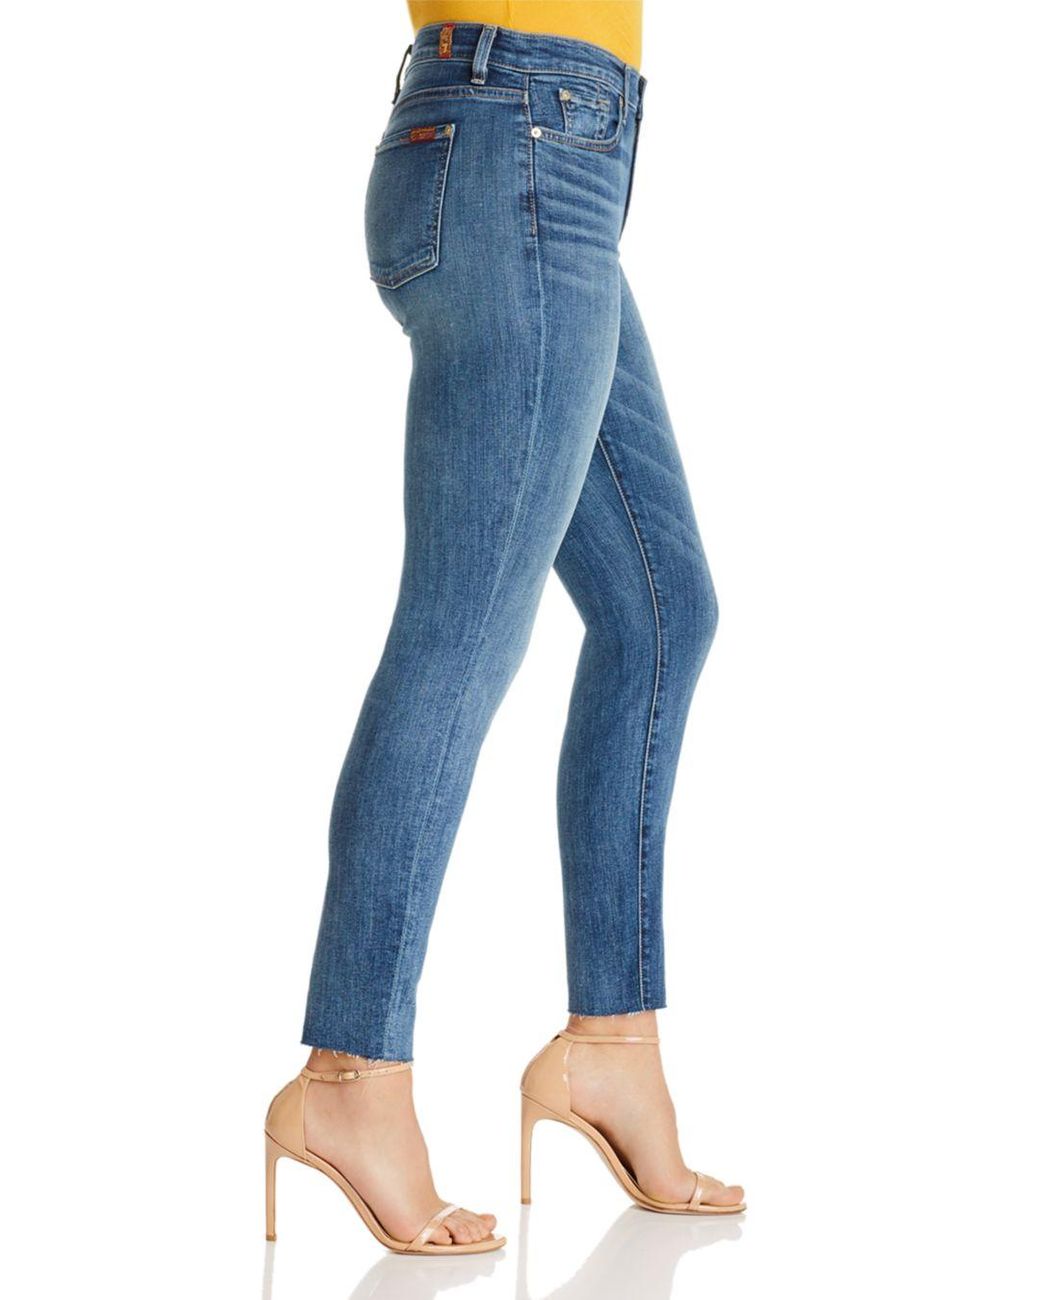 Skinny Jeans with Knee Holes 7 For All Mankind Womens B air 